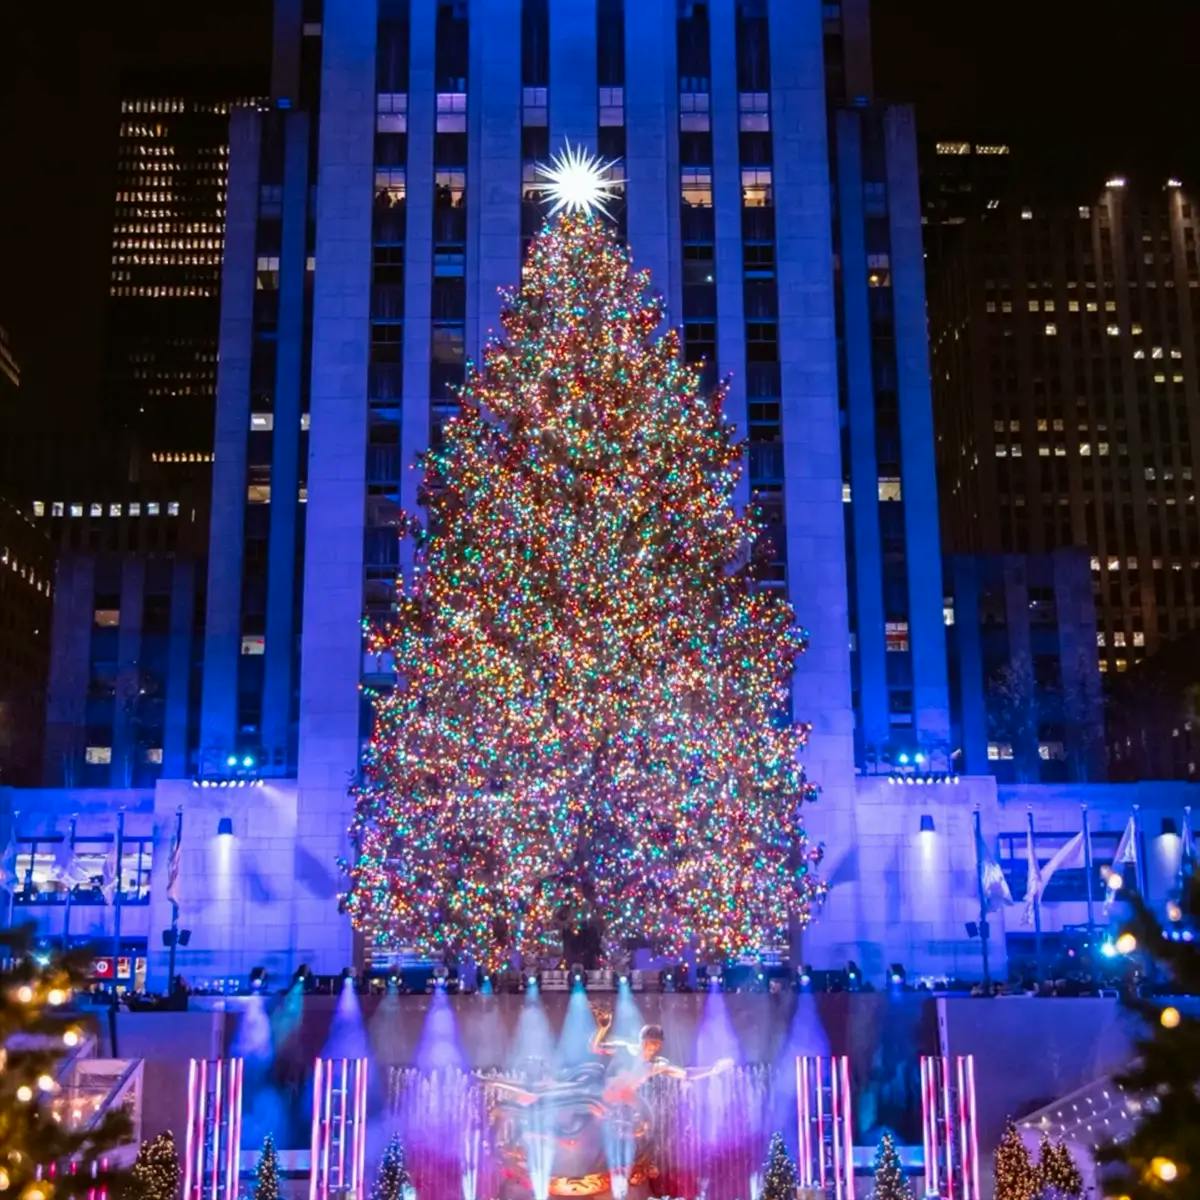 Rockefeller Center Christmas Tree with lights at night with the New York City buildings behind.